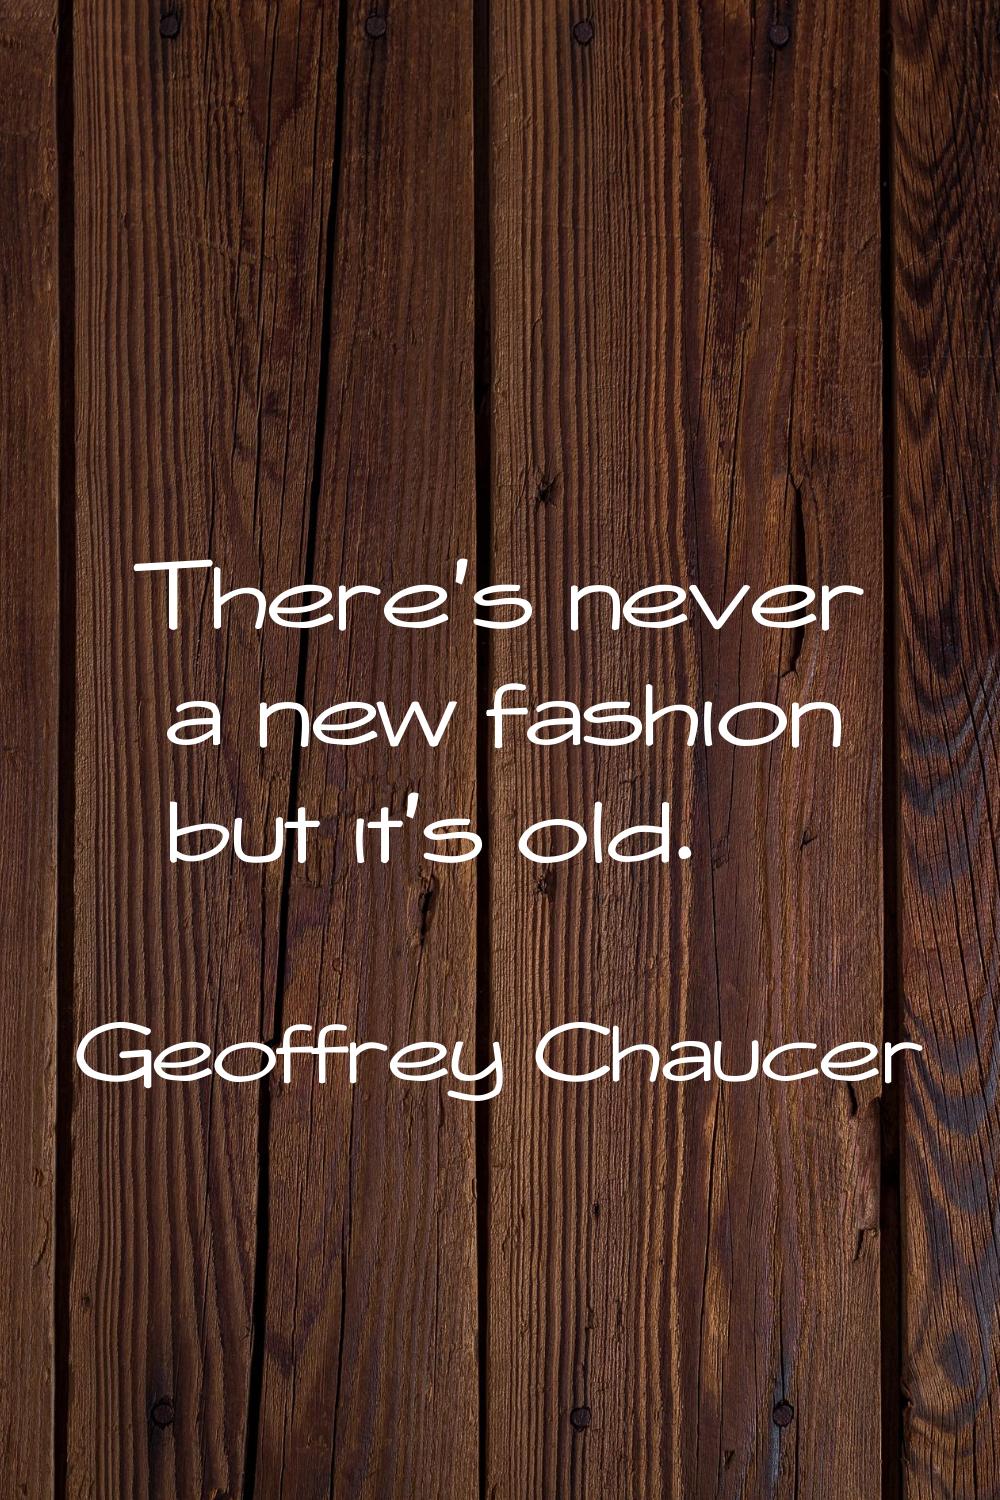 There's never a new fashion but it's old.